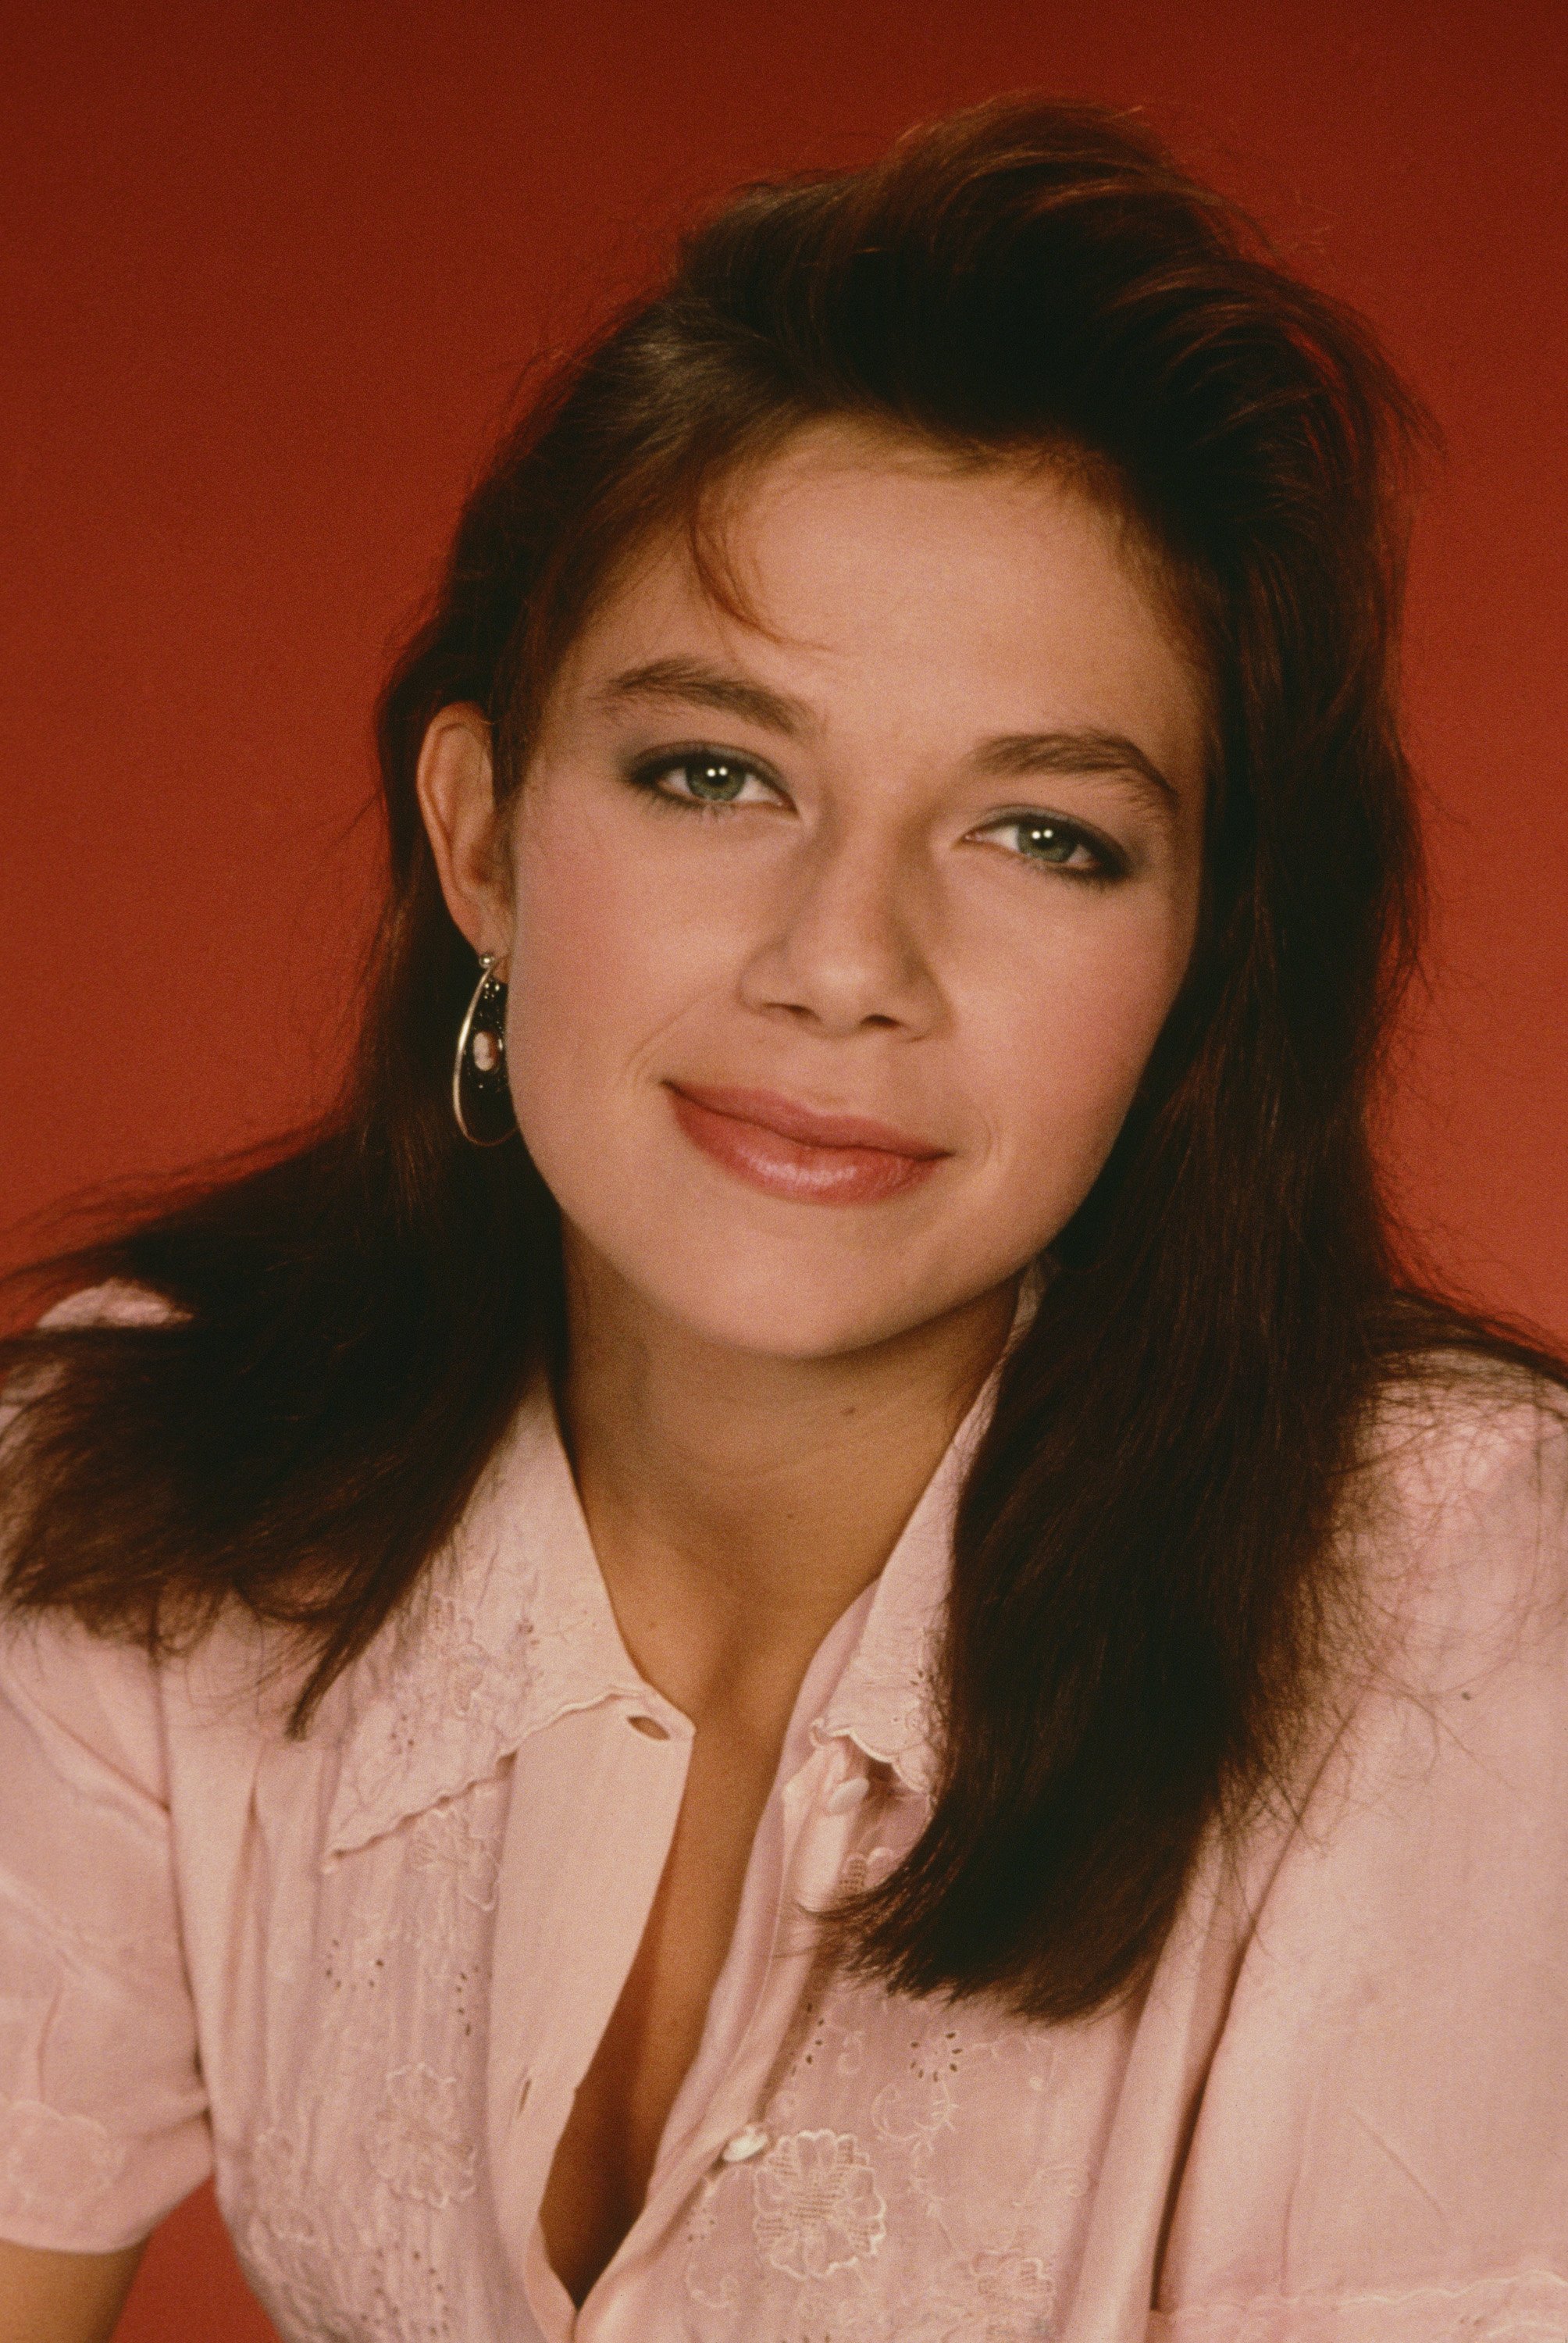 Justine Bateman as Mallory Keaton in "Family Ties," circa 1982 | Source: Getty Images